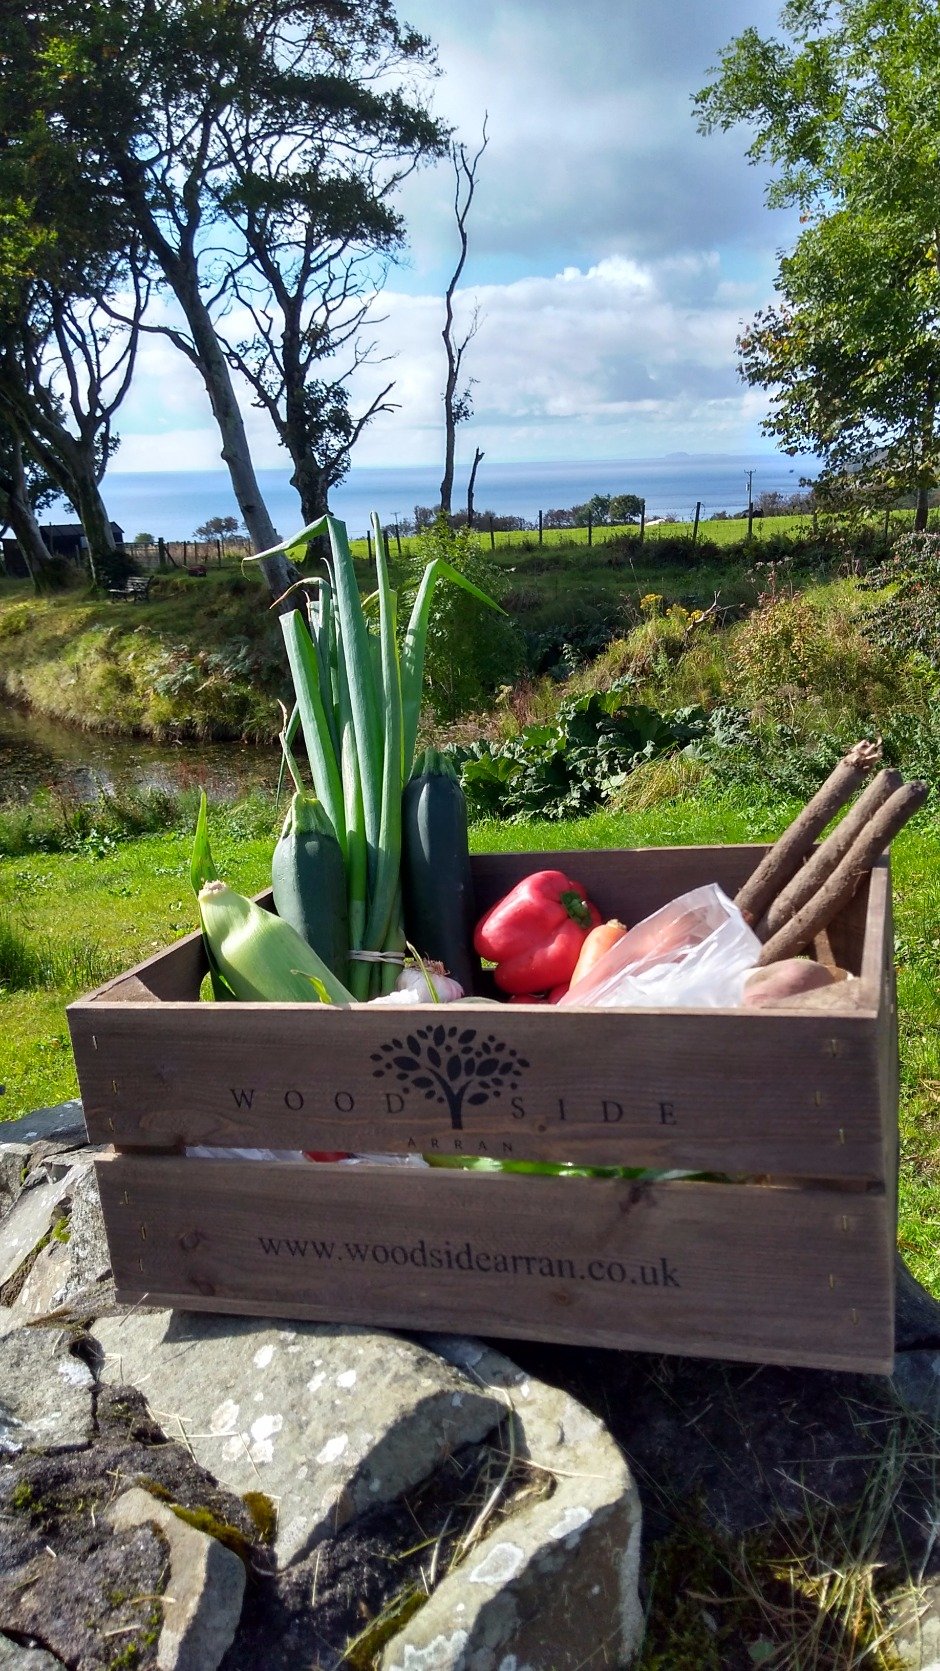 Woodside Arran is a social enterprise on the beautiful island of Arran set up to create and maintain a robust and diverse local food network.